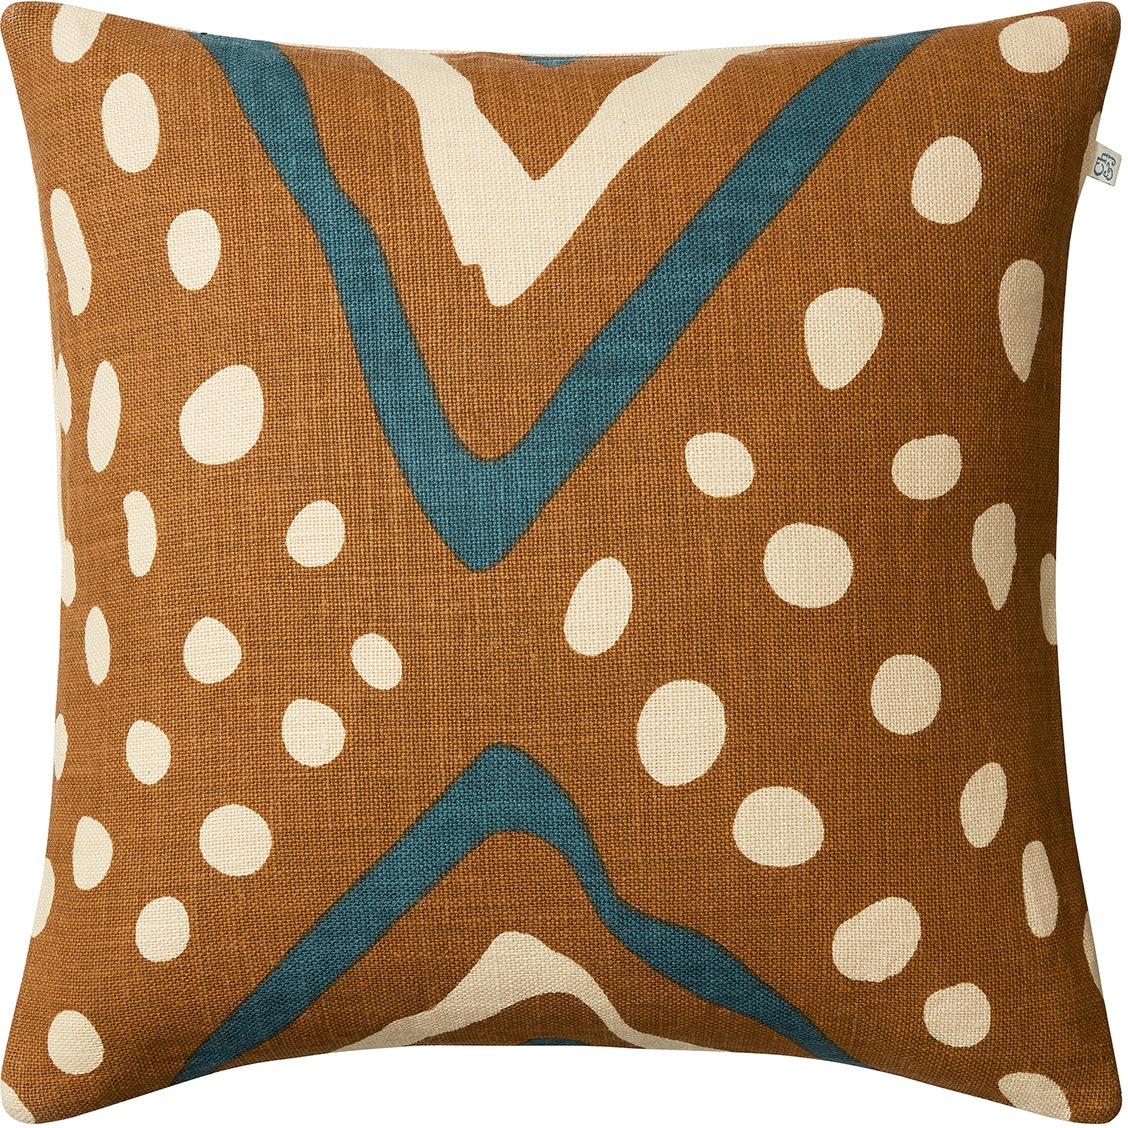 Rajasthan Cushion Cover 50x50 cm, Taupe / Palace Blue / Light Beige